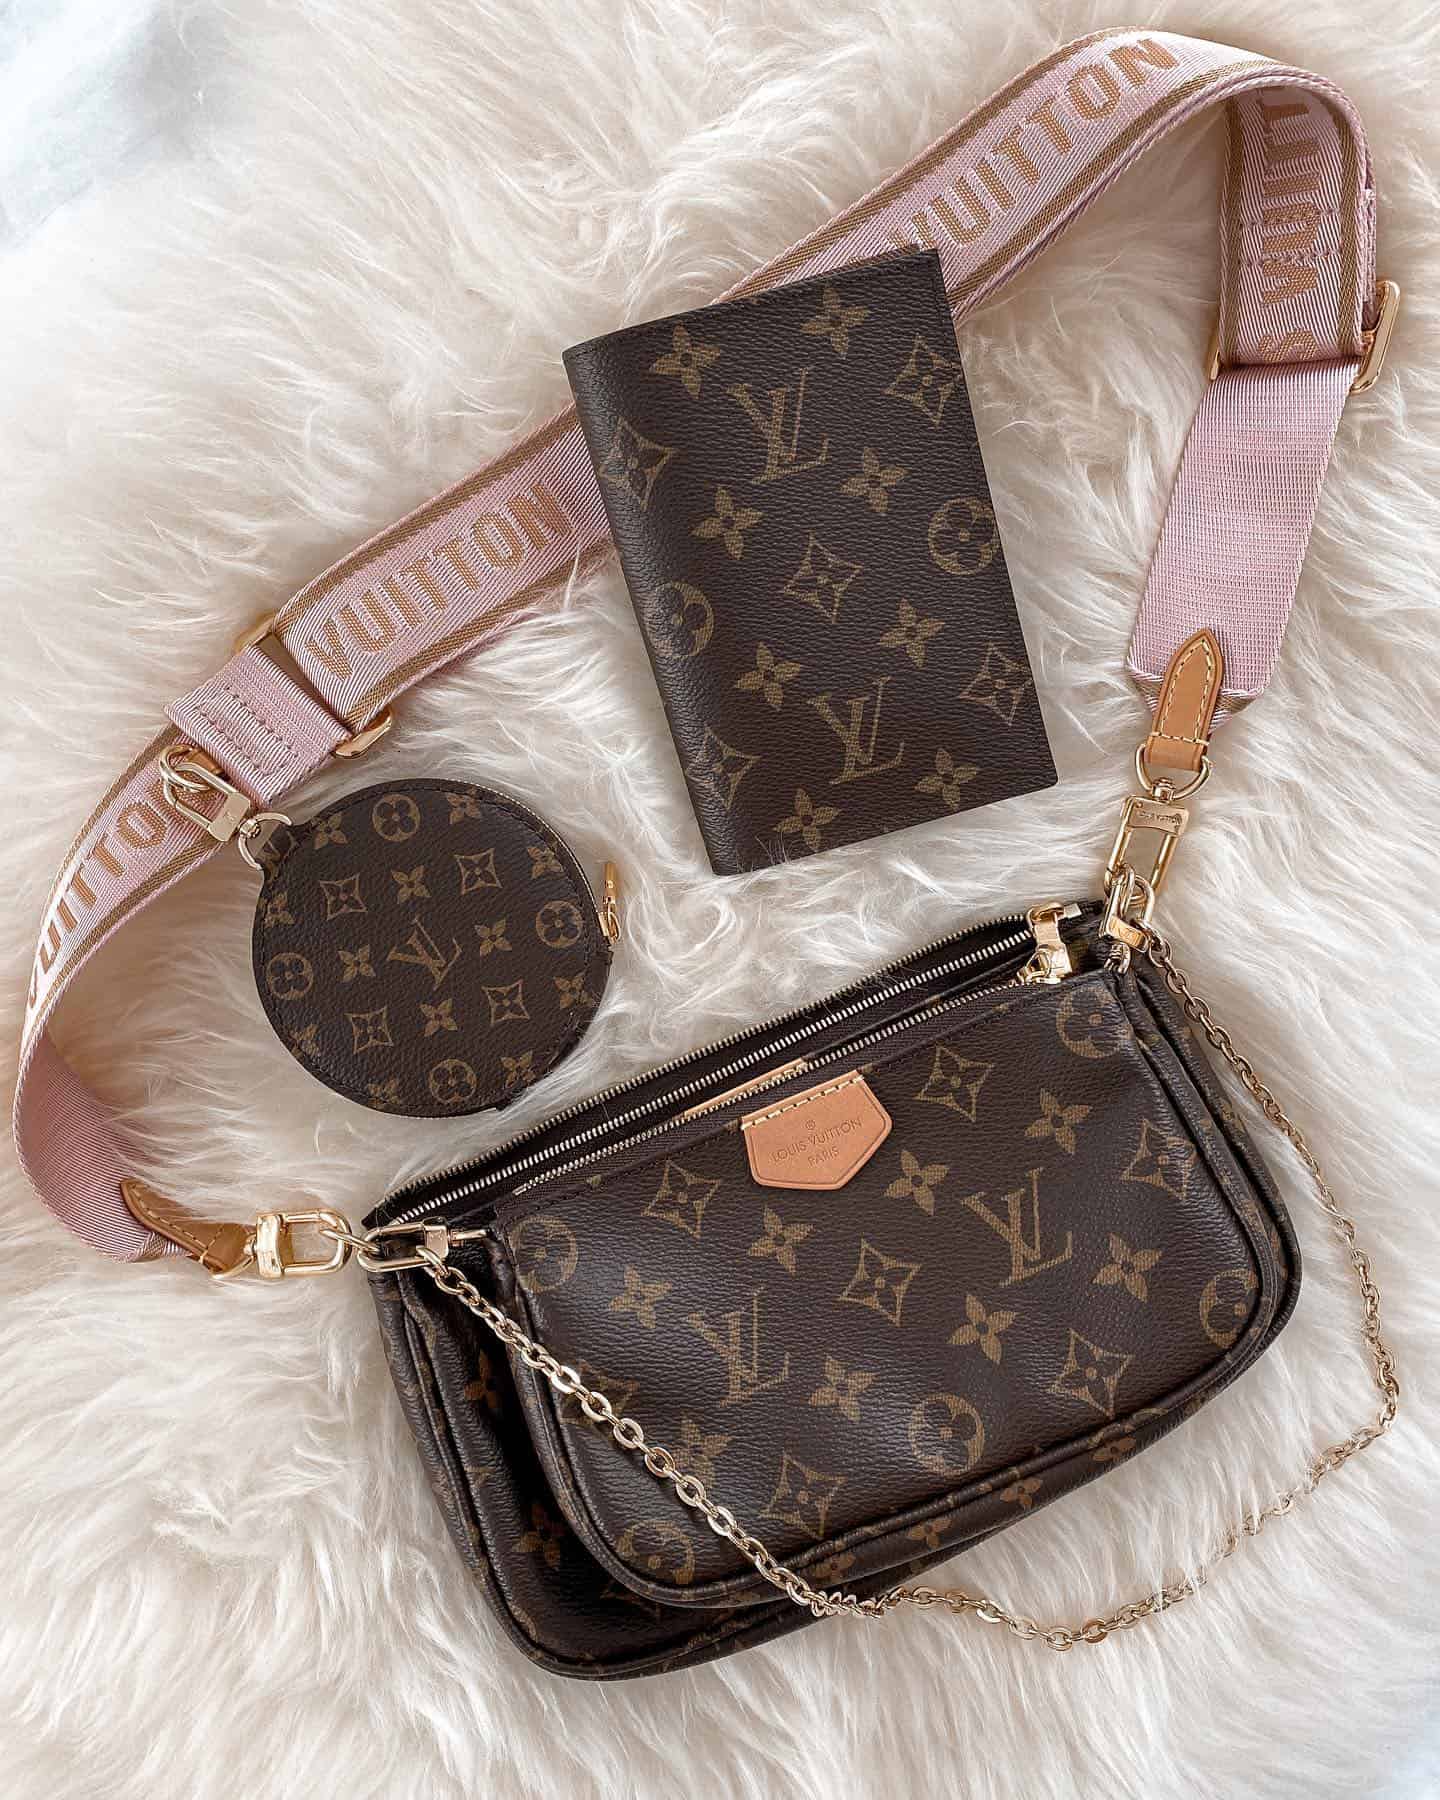 LV Bags are expensive to buy